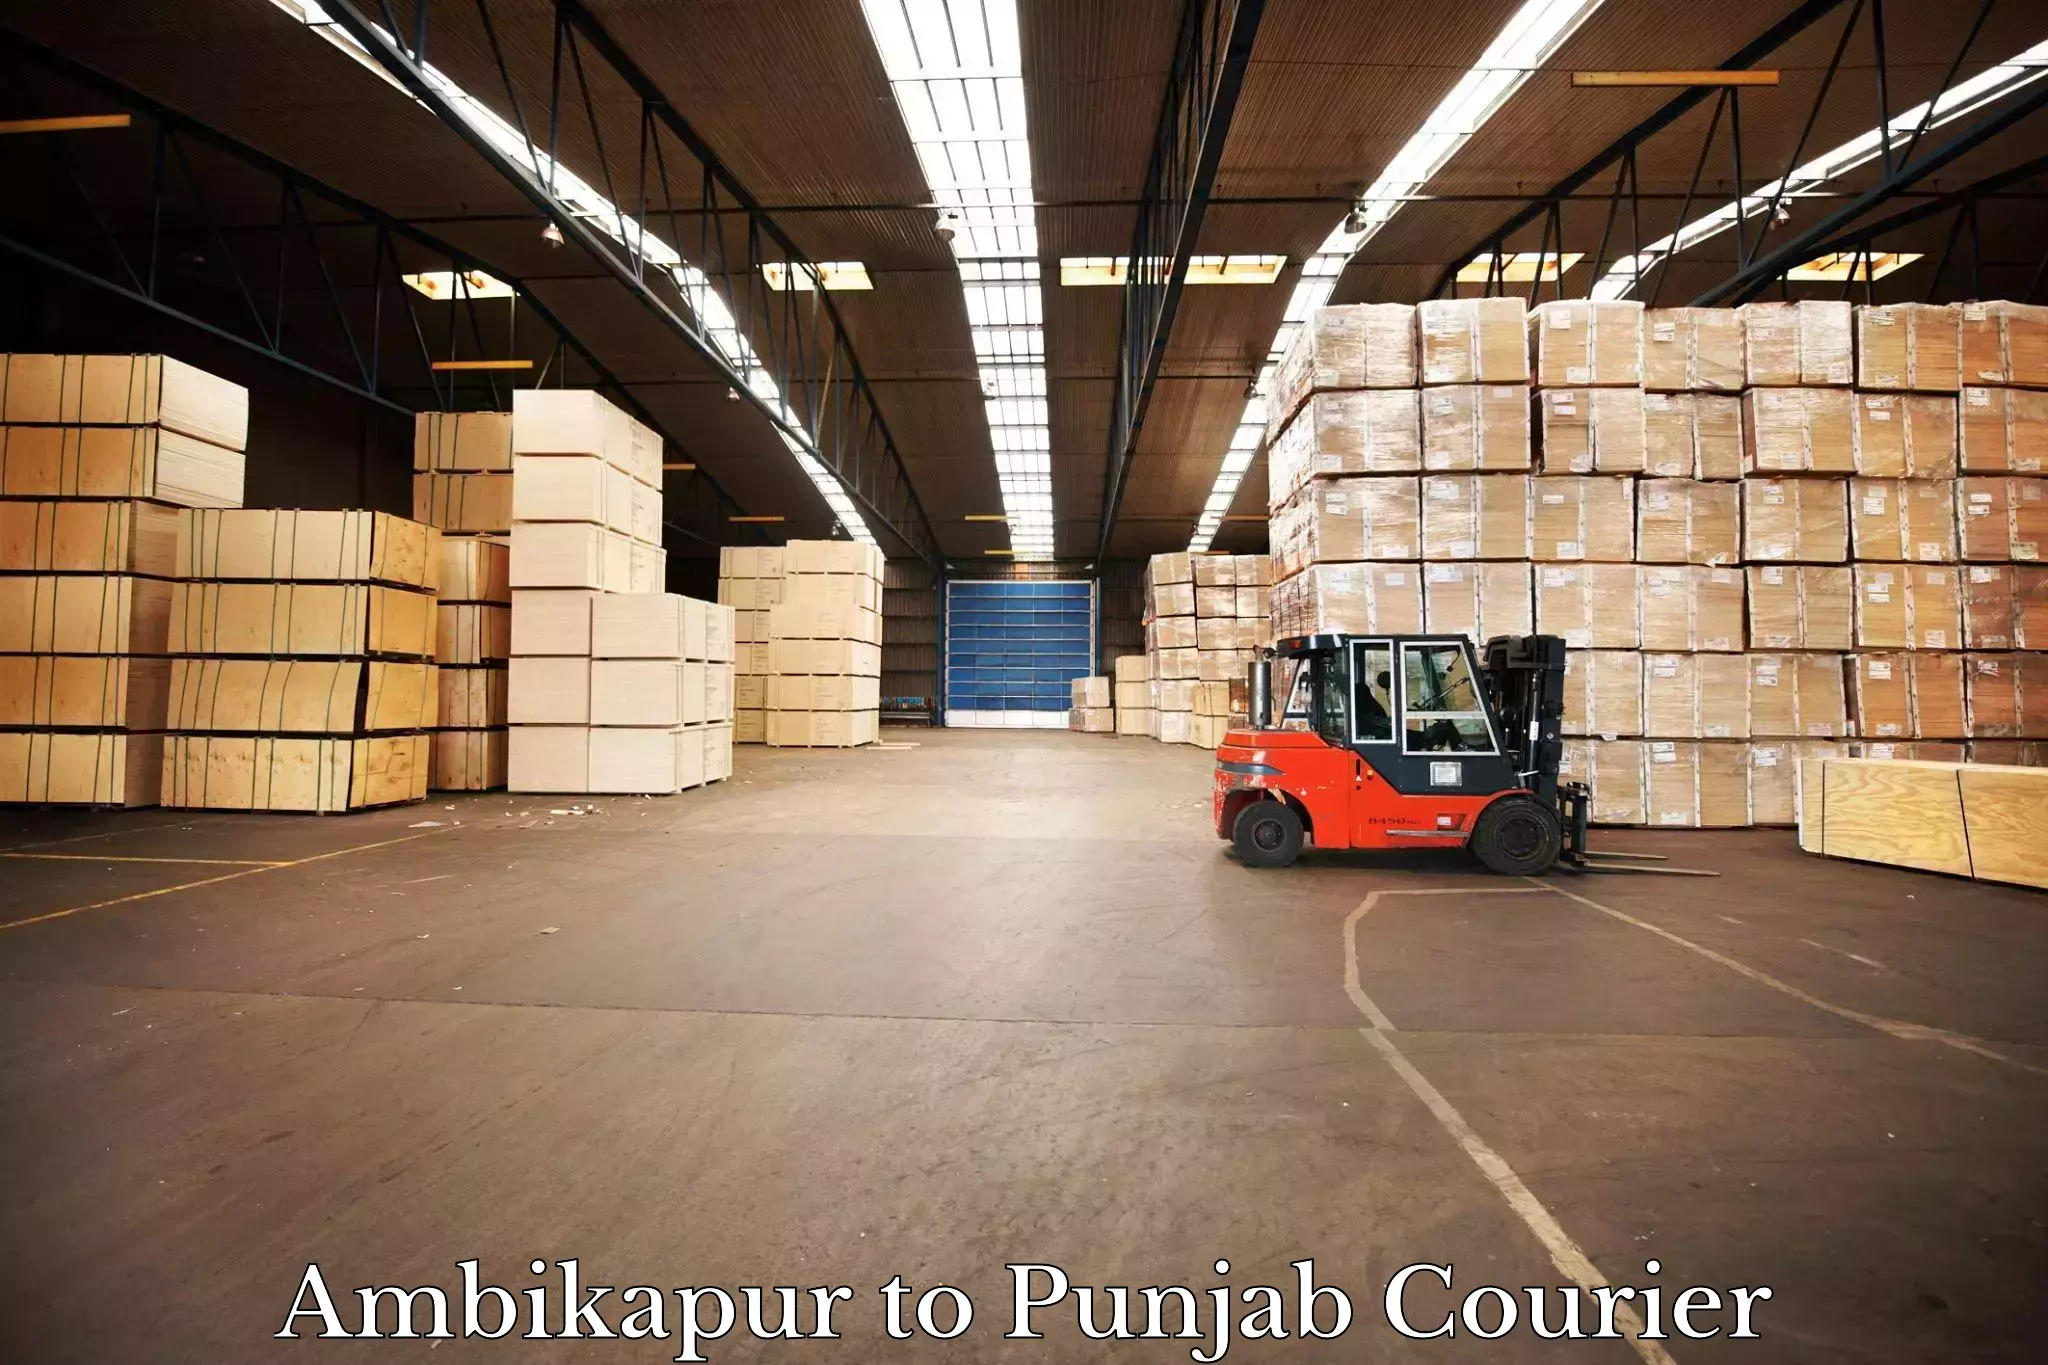 Subscription-based courier Ambikapur to Fatehgarh Sahib